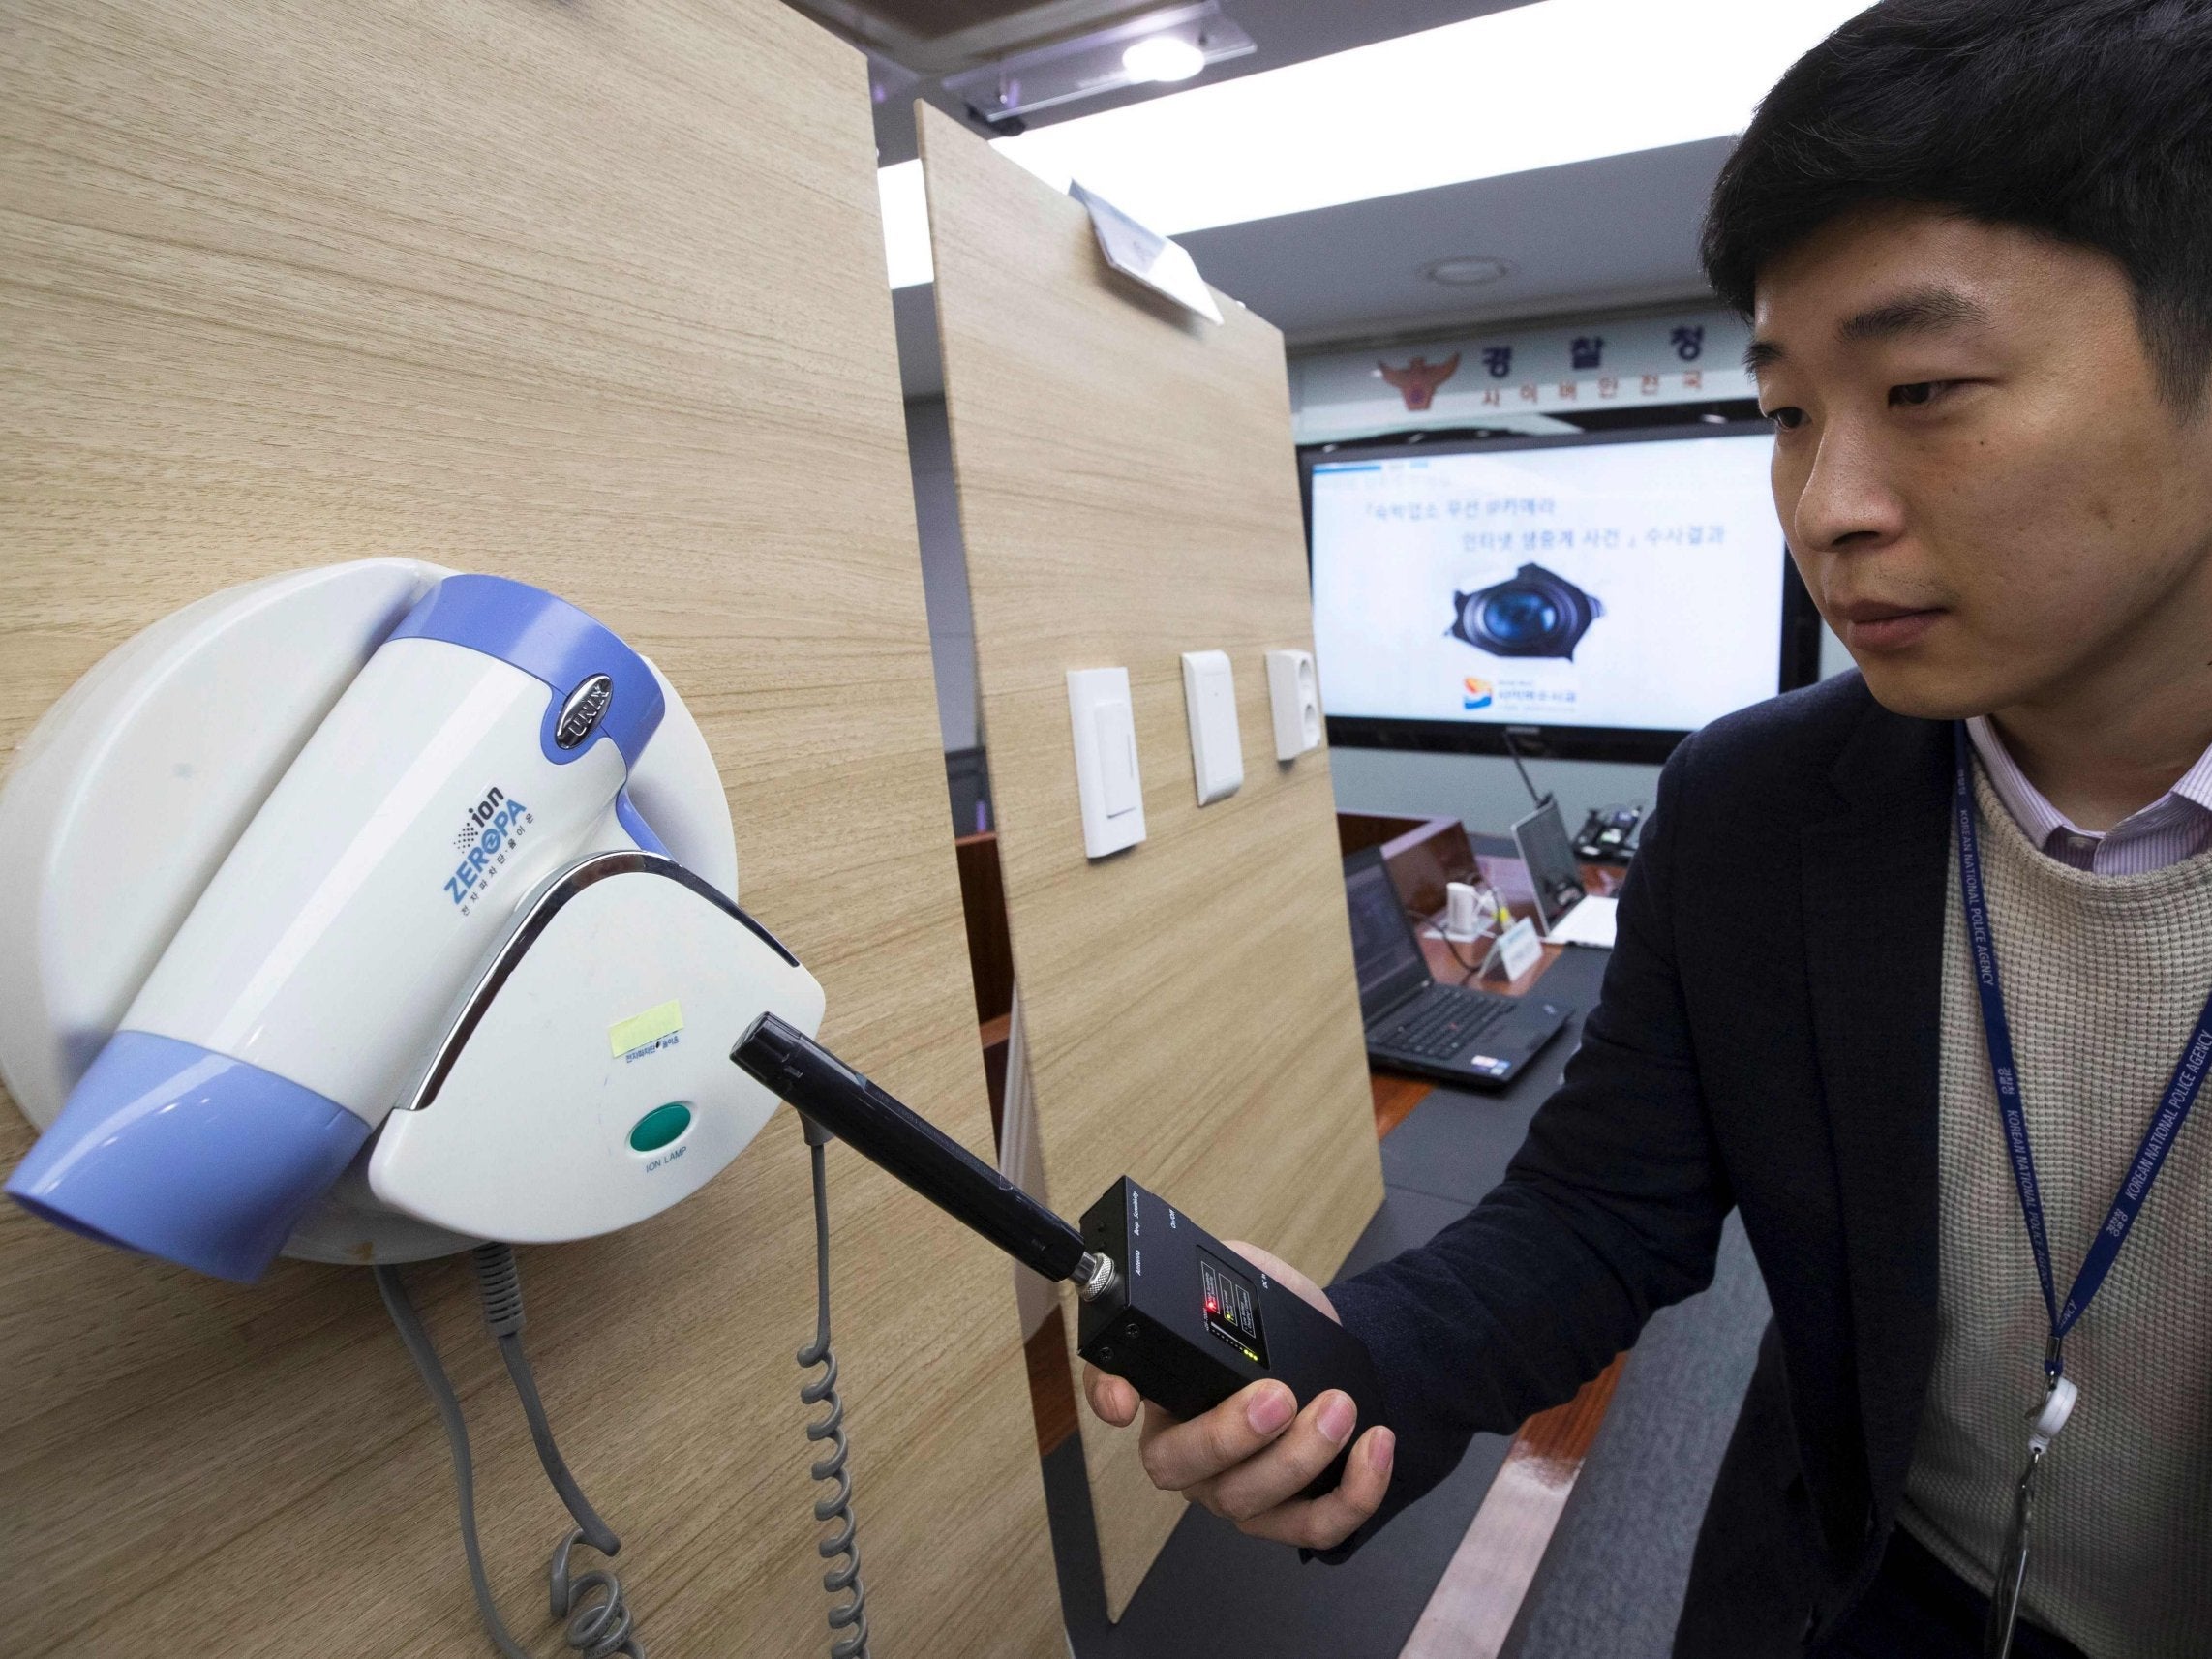 A police official waves a spy-cam detector in front of a wall-mounted hairdryer during a press conference in Seoul